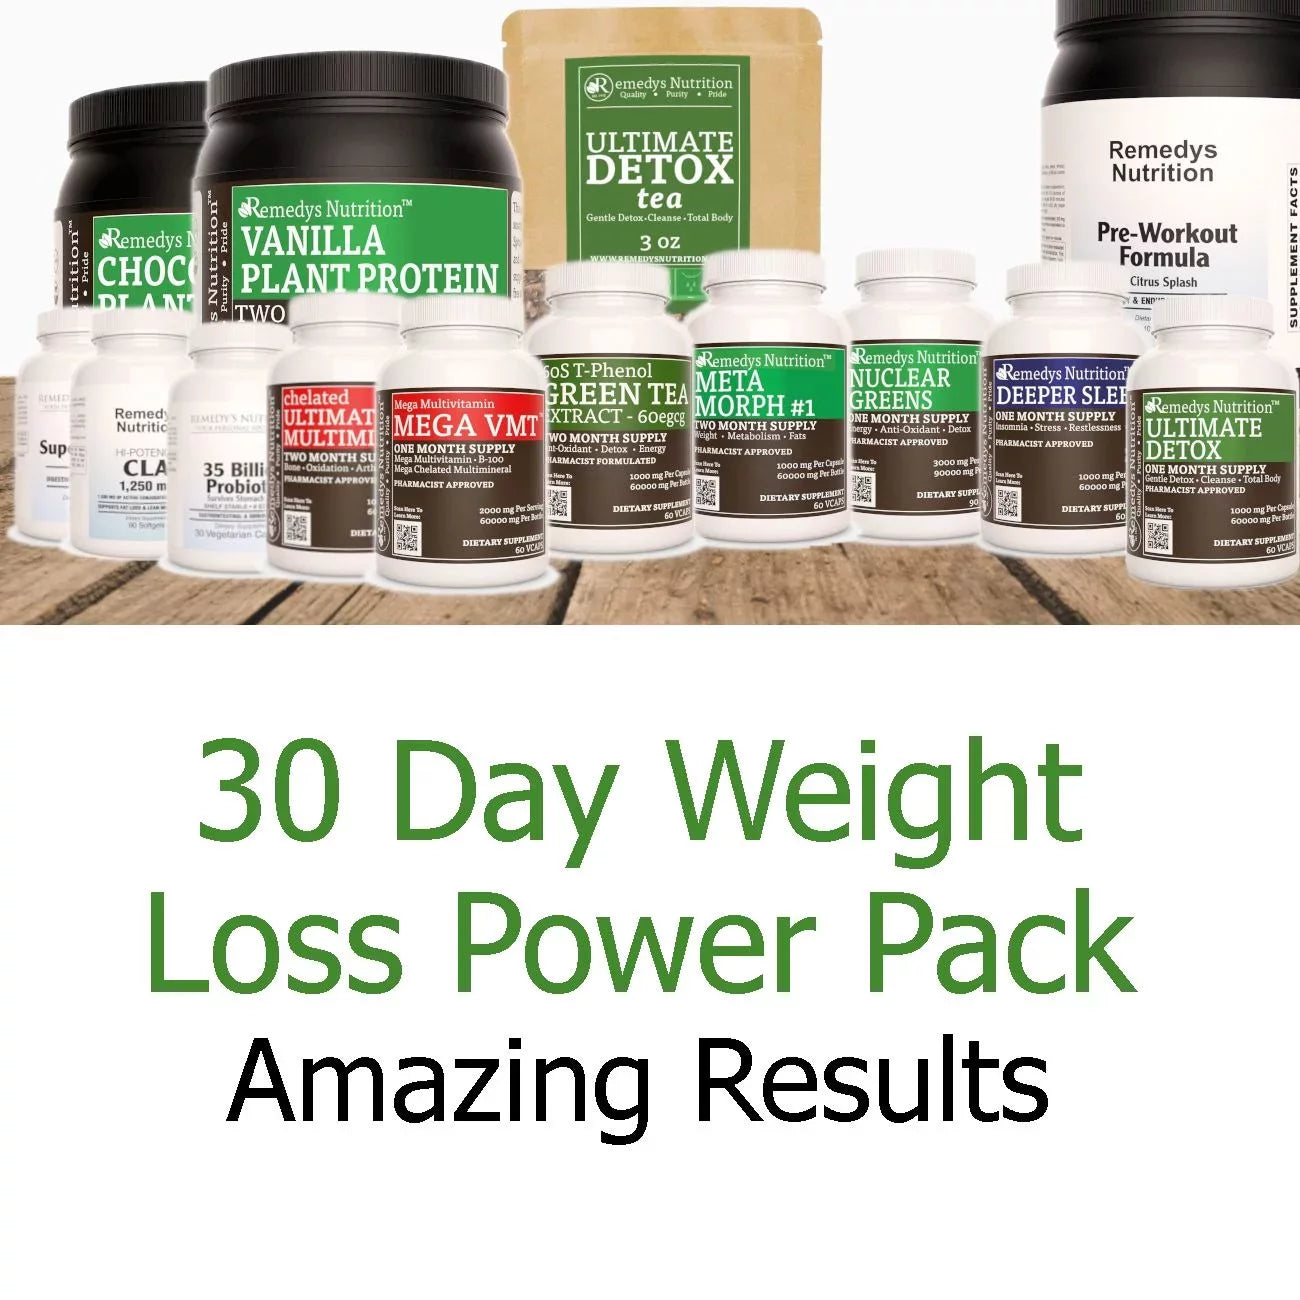 30 Day Weight Loss Power Pack™ | Eleven Supplement Bottles, 2 Powders & Tea